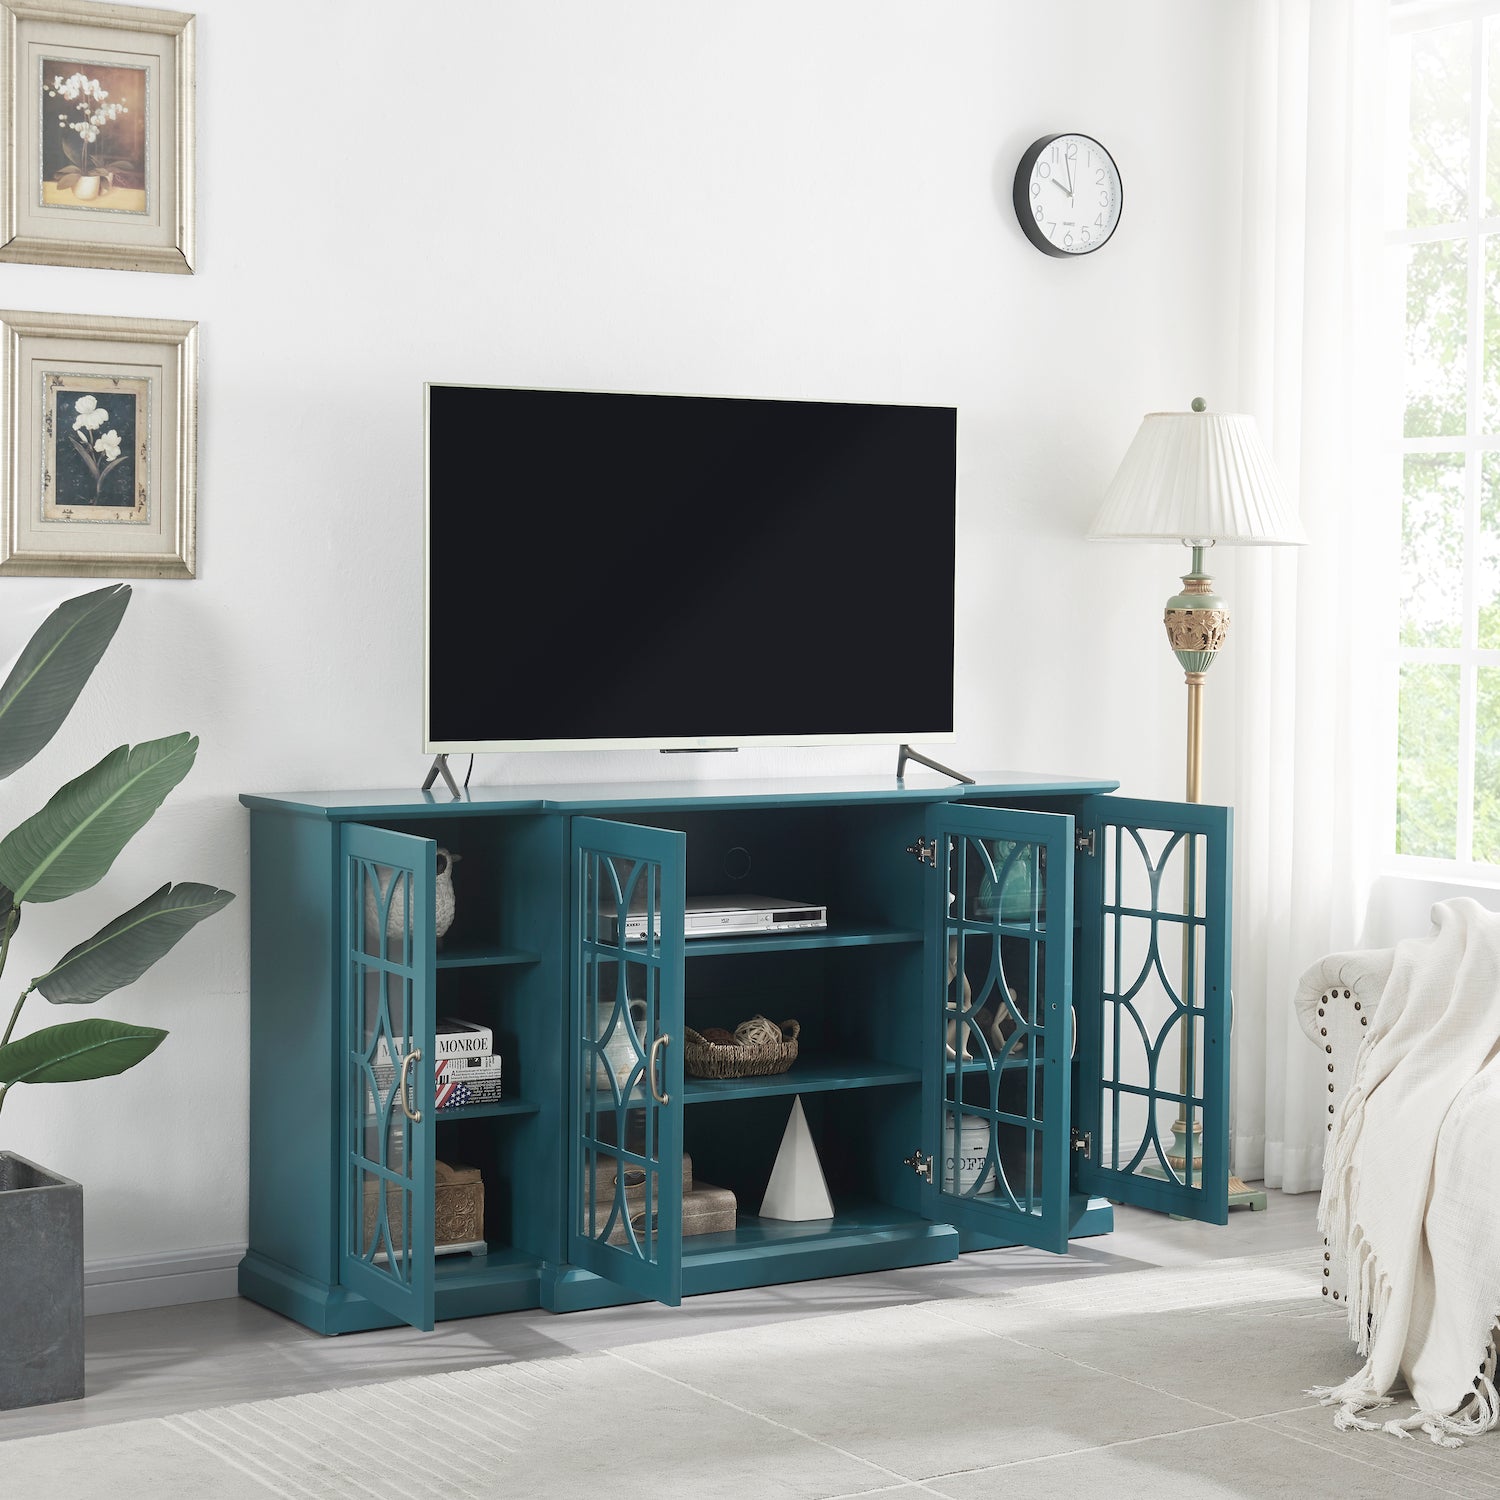 JaydenMax 63" TV Console or Buffet Cabinet - Teal